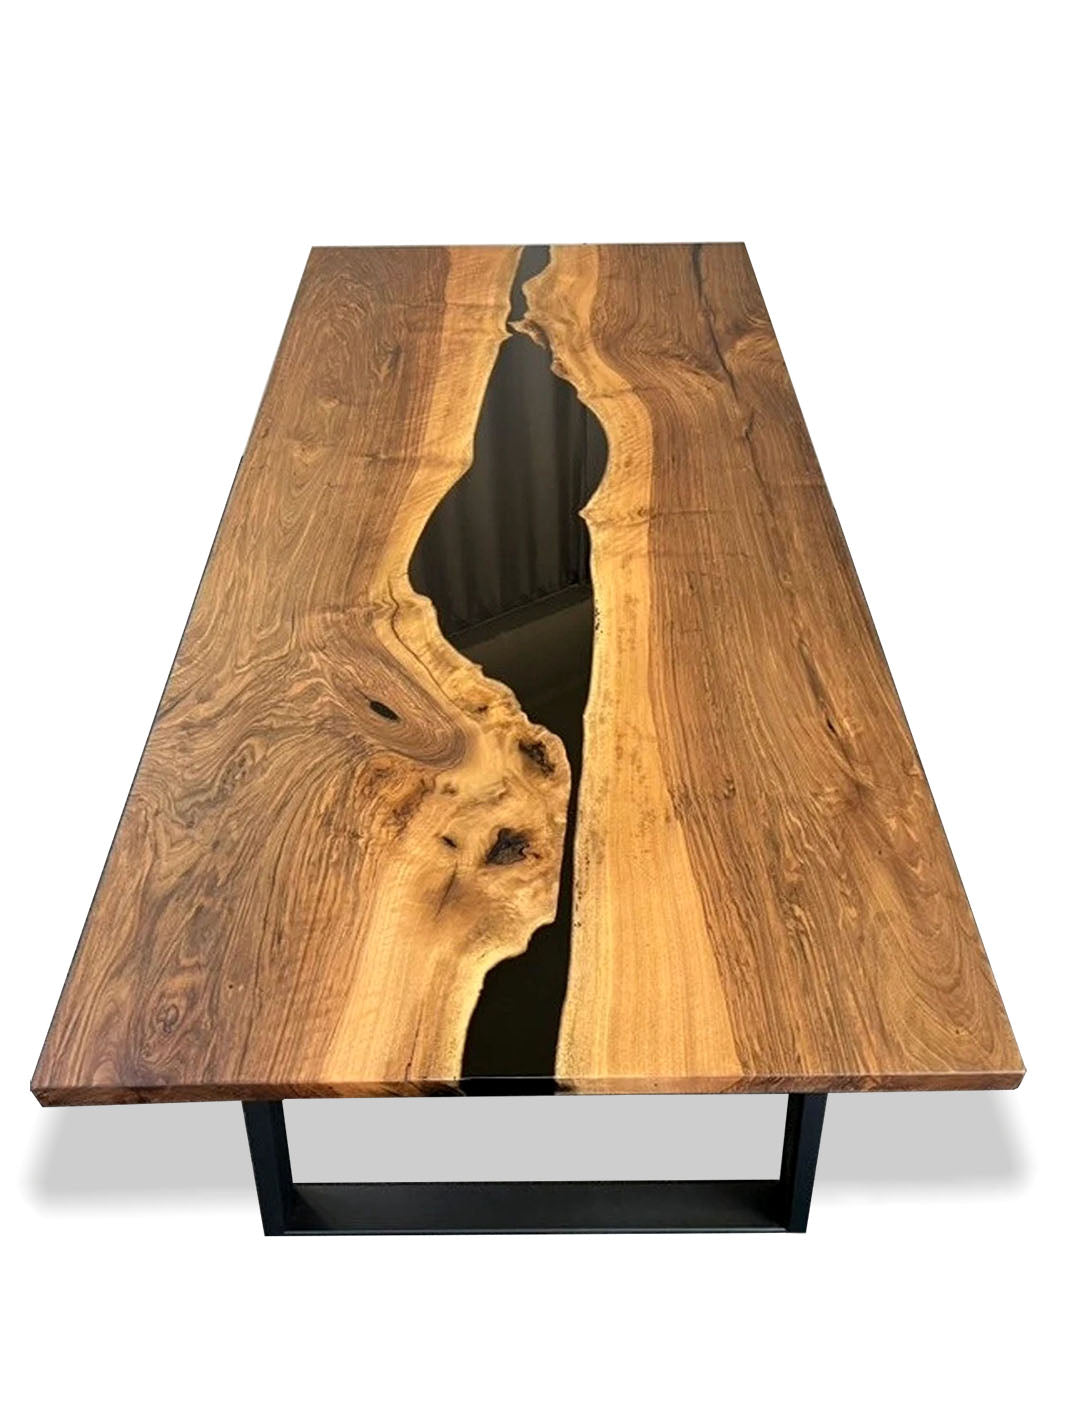 Solid Black Walnut Wood Epoxy Resin River Dining Table Harden Tables HWC-0276